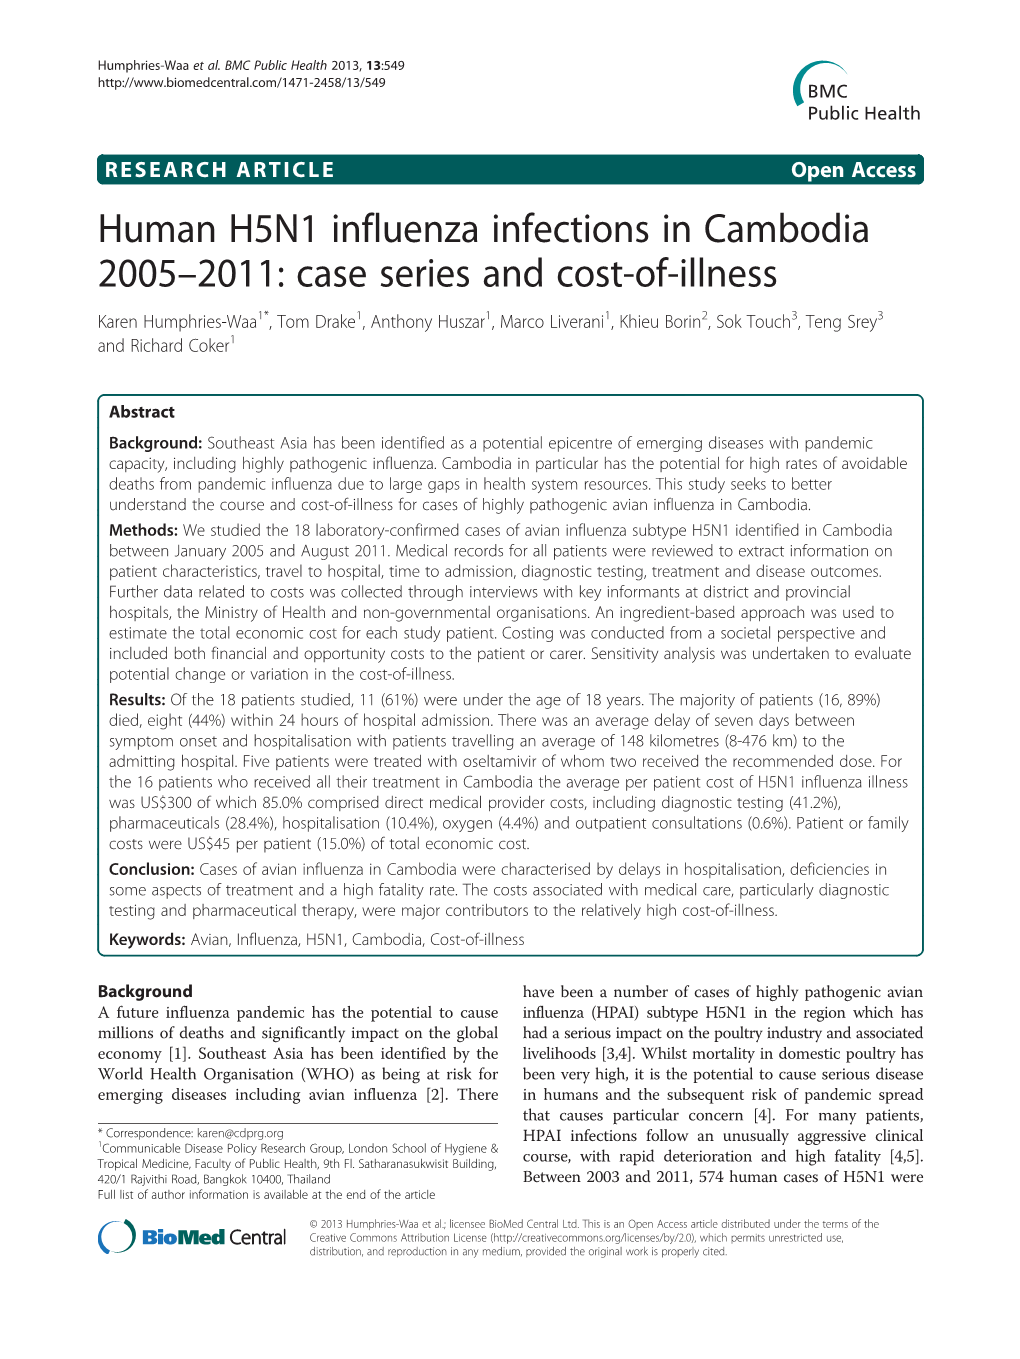 Human H5N1 Influenza Infections in Cambodia 2005-2011: Case Series